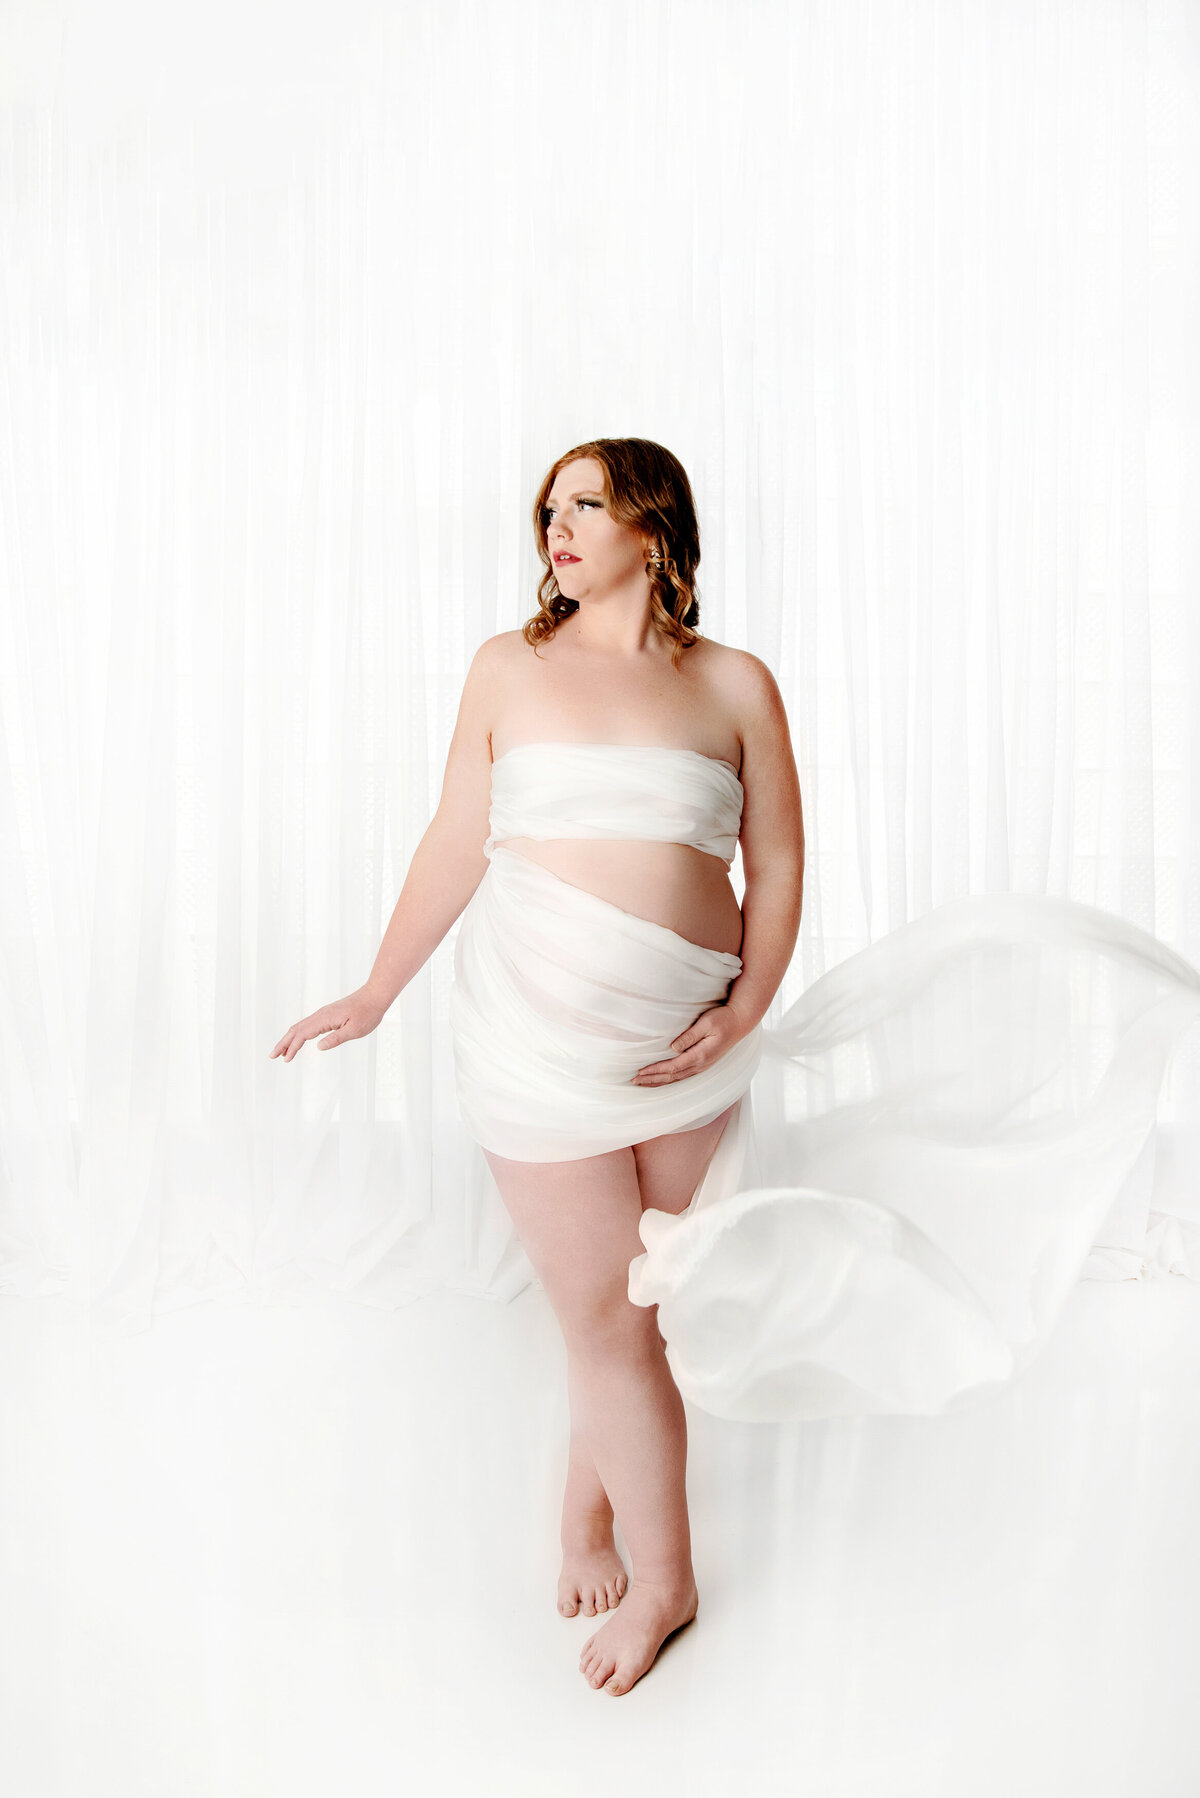 st-louis-maternity-photographer-pregnant-woman-wrapped-in-white-fabric-on-white-backdrop